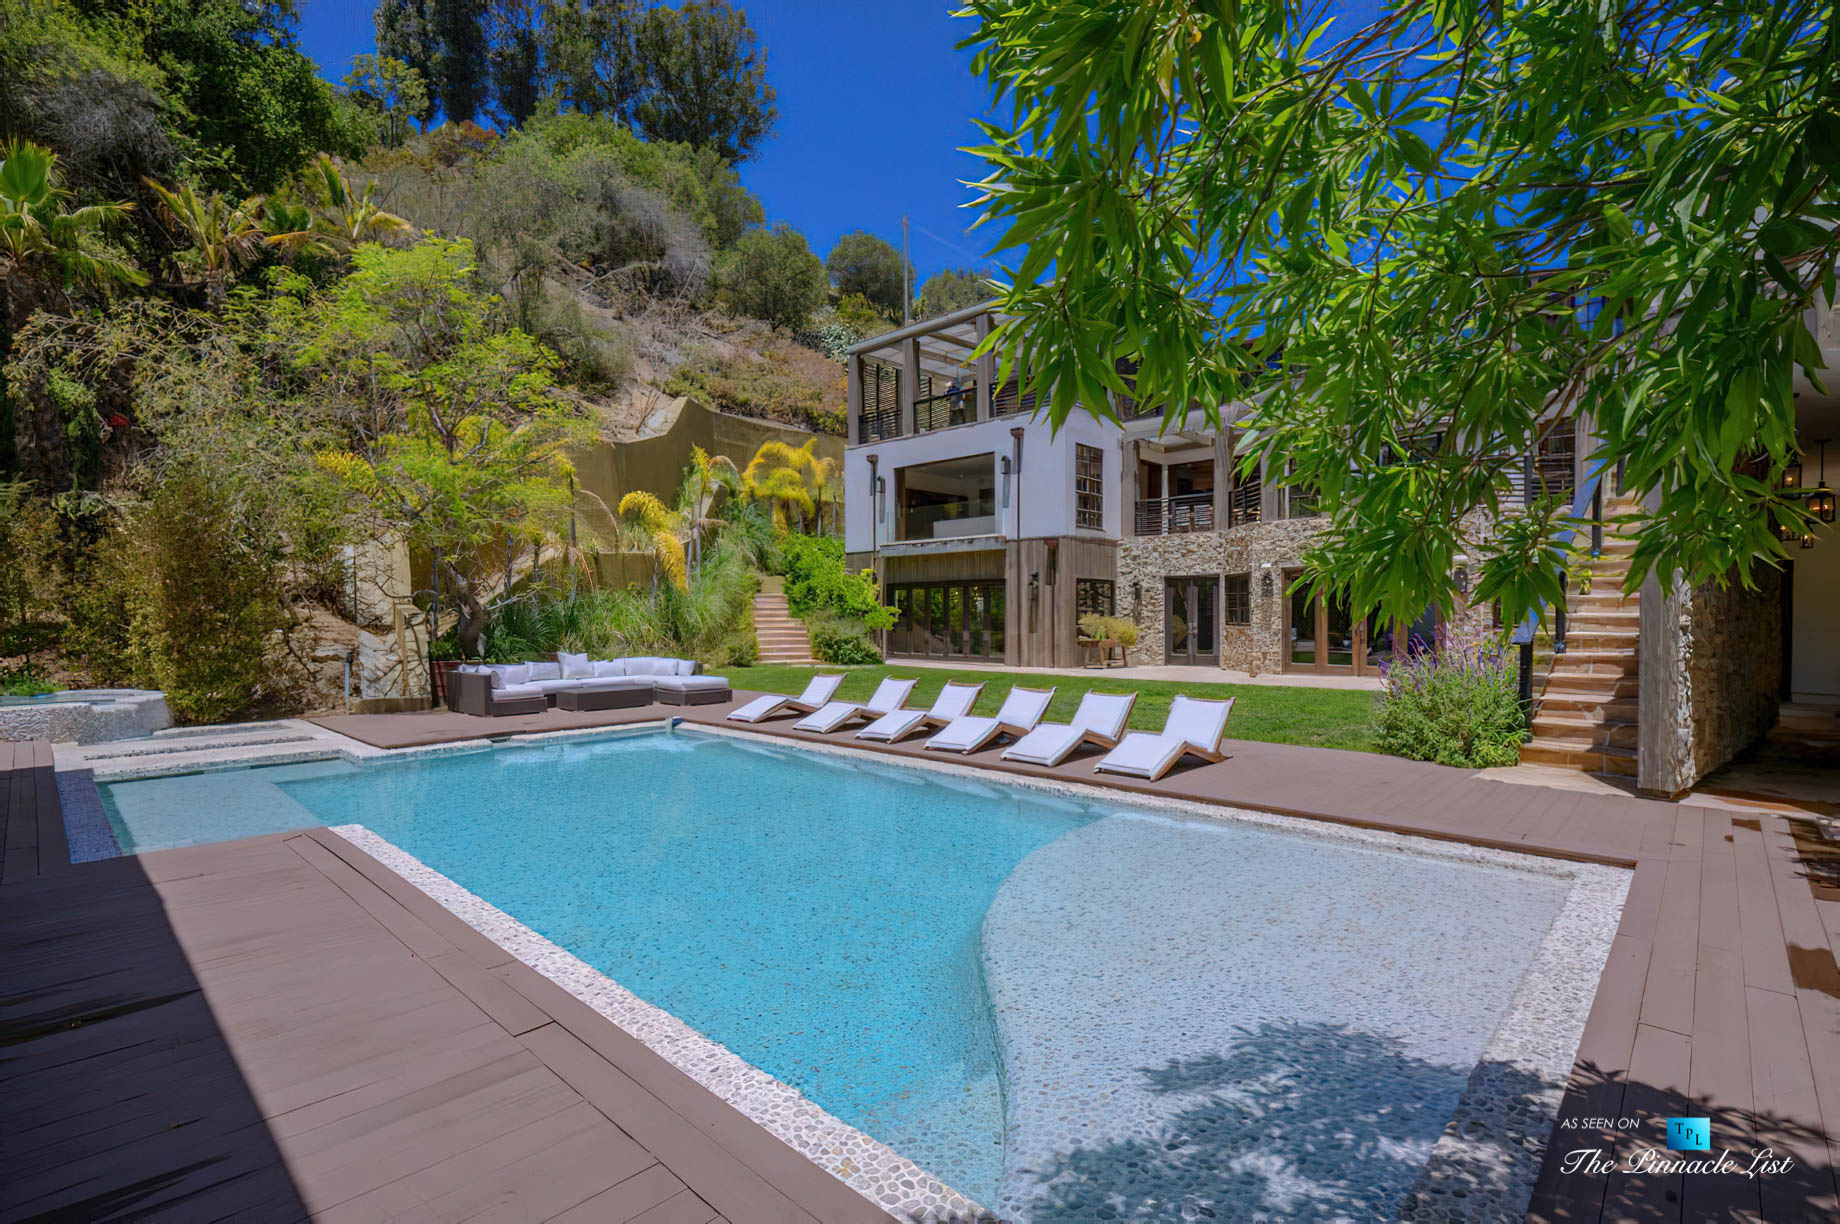 1105 Rivas Canyon Rd, Pacific Palisades, CA, USA - Luxury Real Estate - Exterior Pool Deck